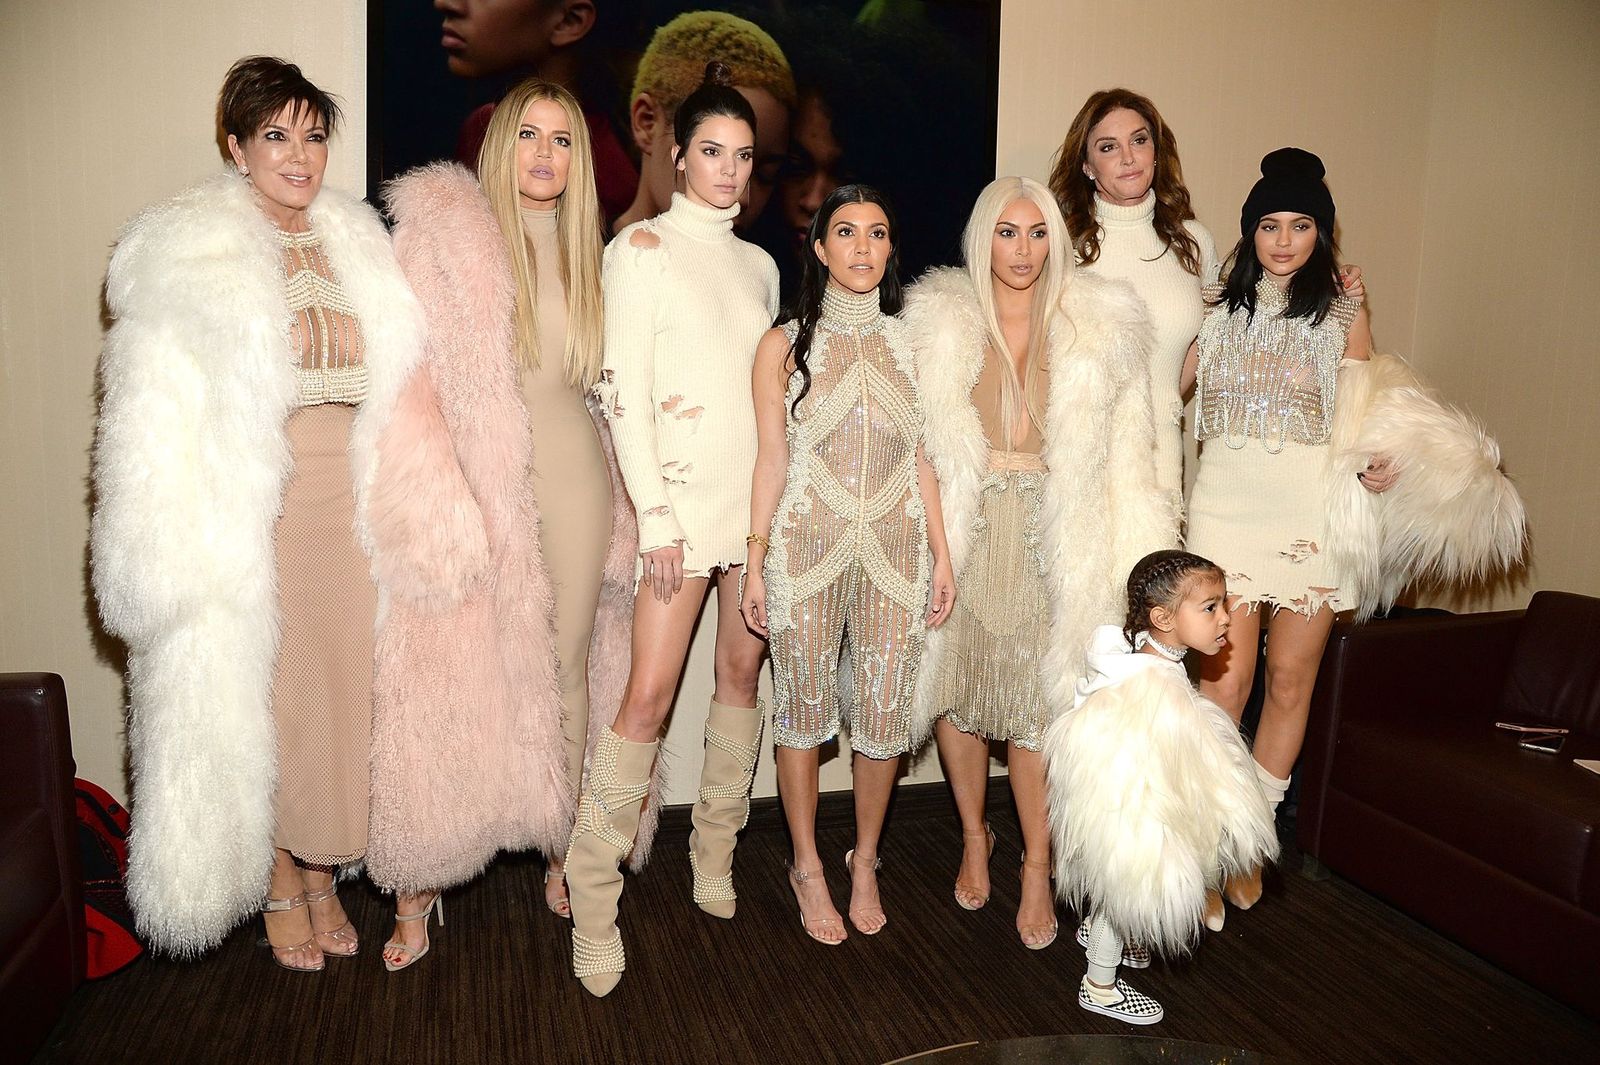 Khloe Kardashian, Kris Jenner, Kendall Jenner, Kourtney Kardashian, Kim Kardashian West, North West, Caitlyn Jenner and Kylie Jenner attend Kanye West Yeezy Season 3 at Madison Square Garden on February 11, 2016 in New York City. | Photo: Getty Images.